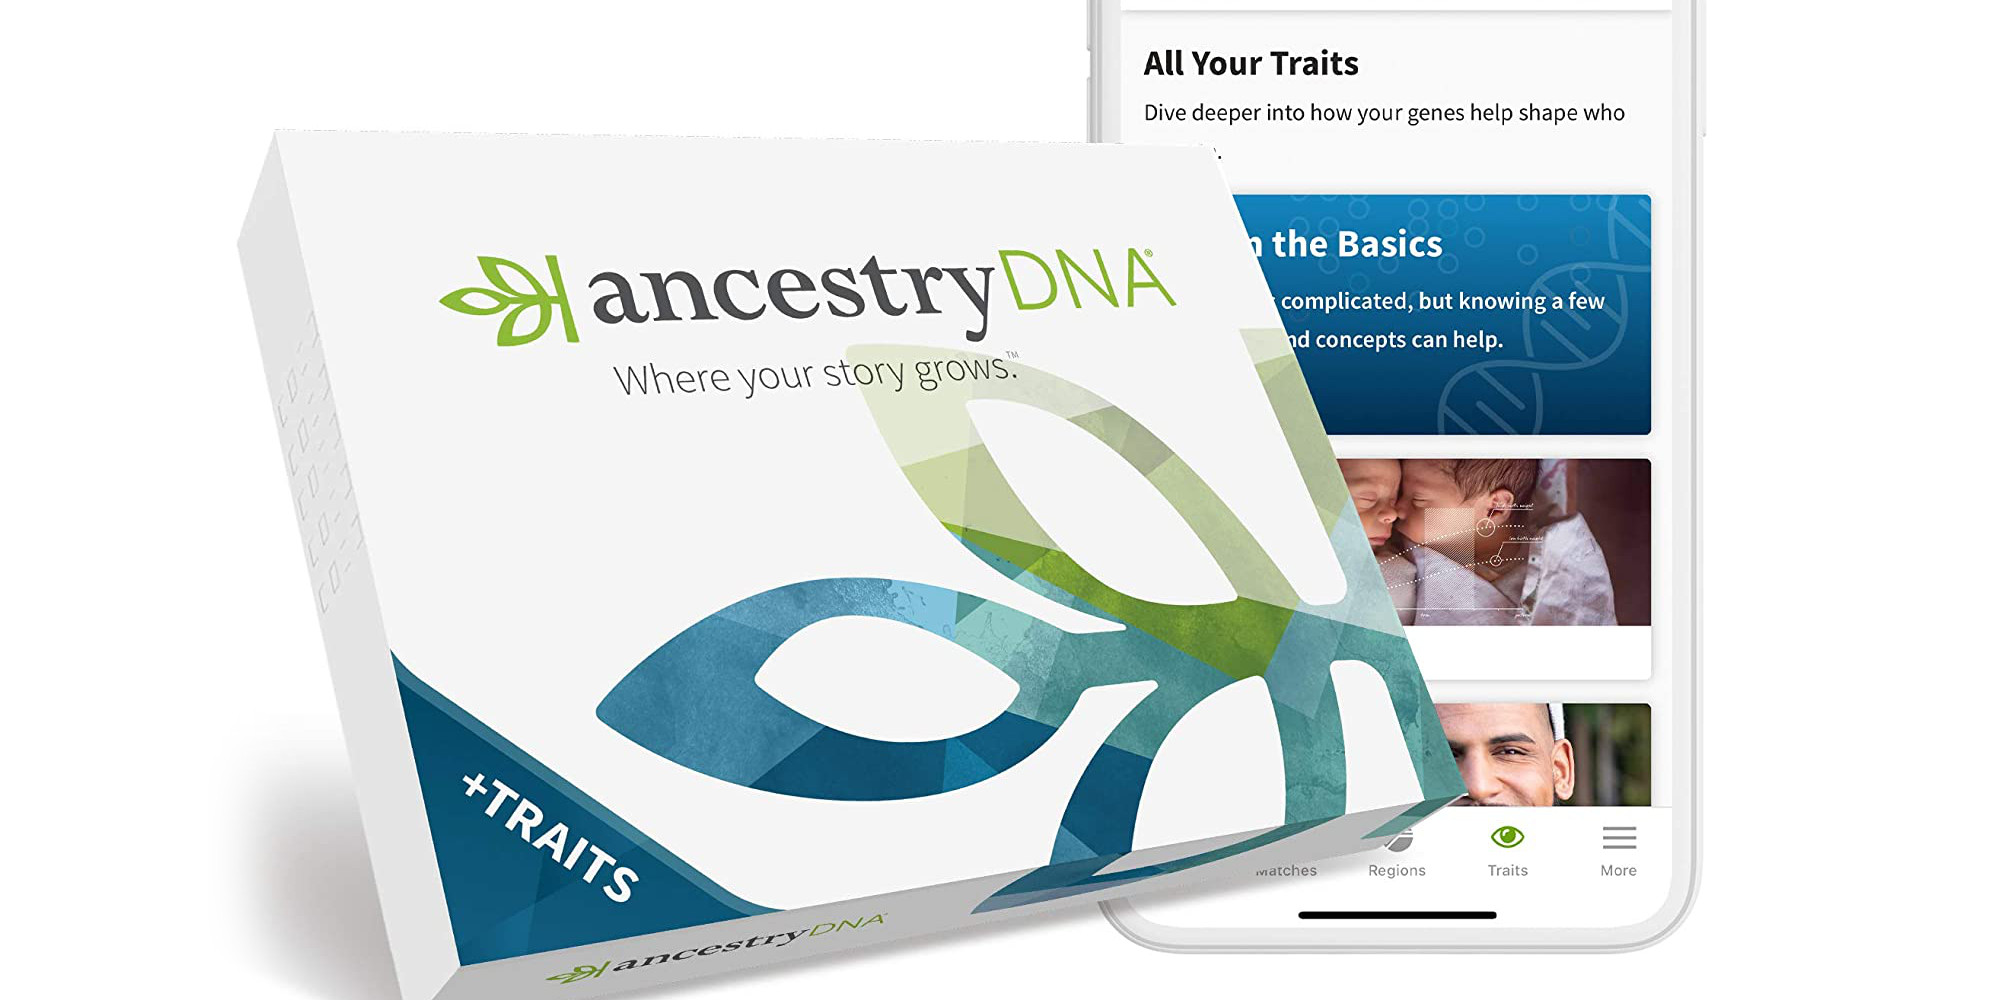 explore-your-lineage-prime-day-ancestry-dna-23andme-more-kits-from